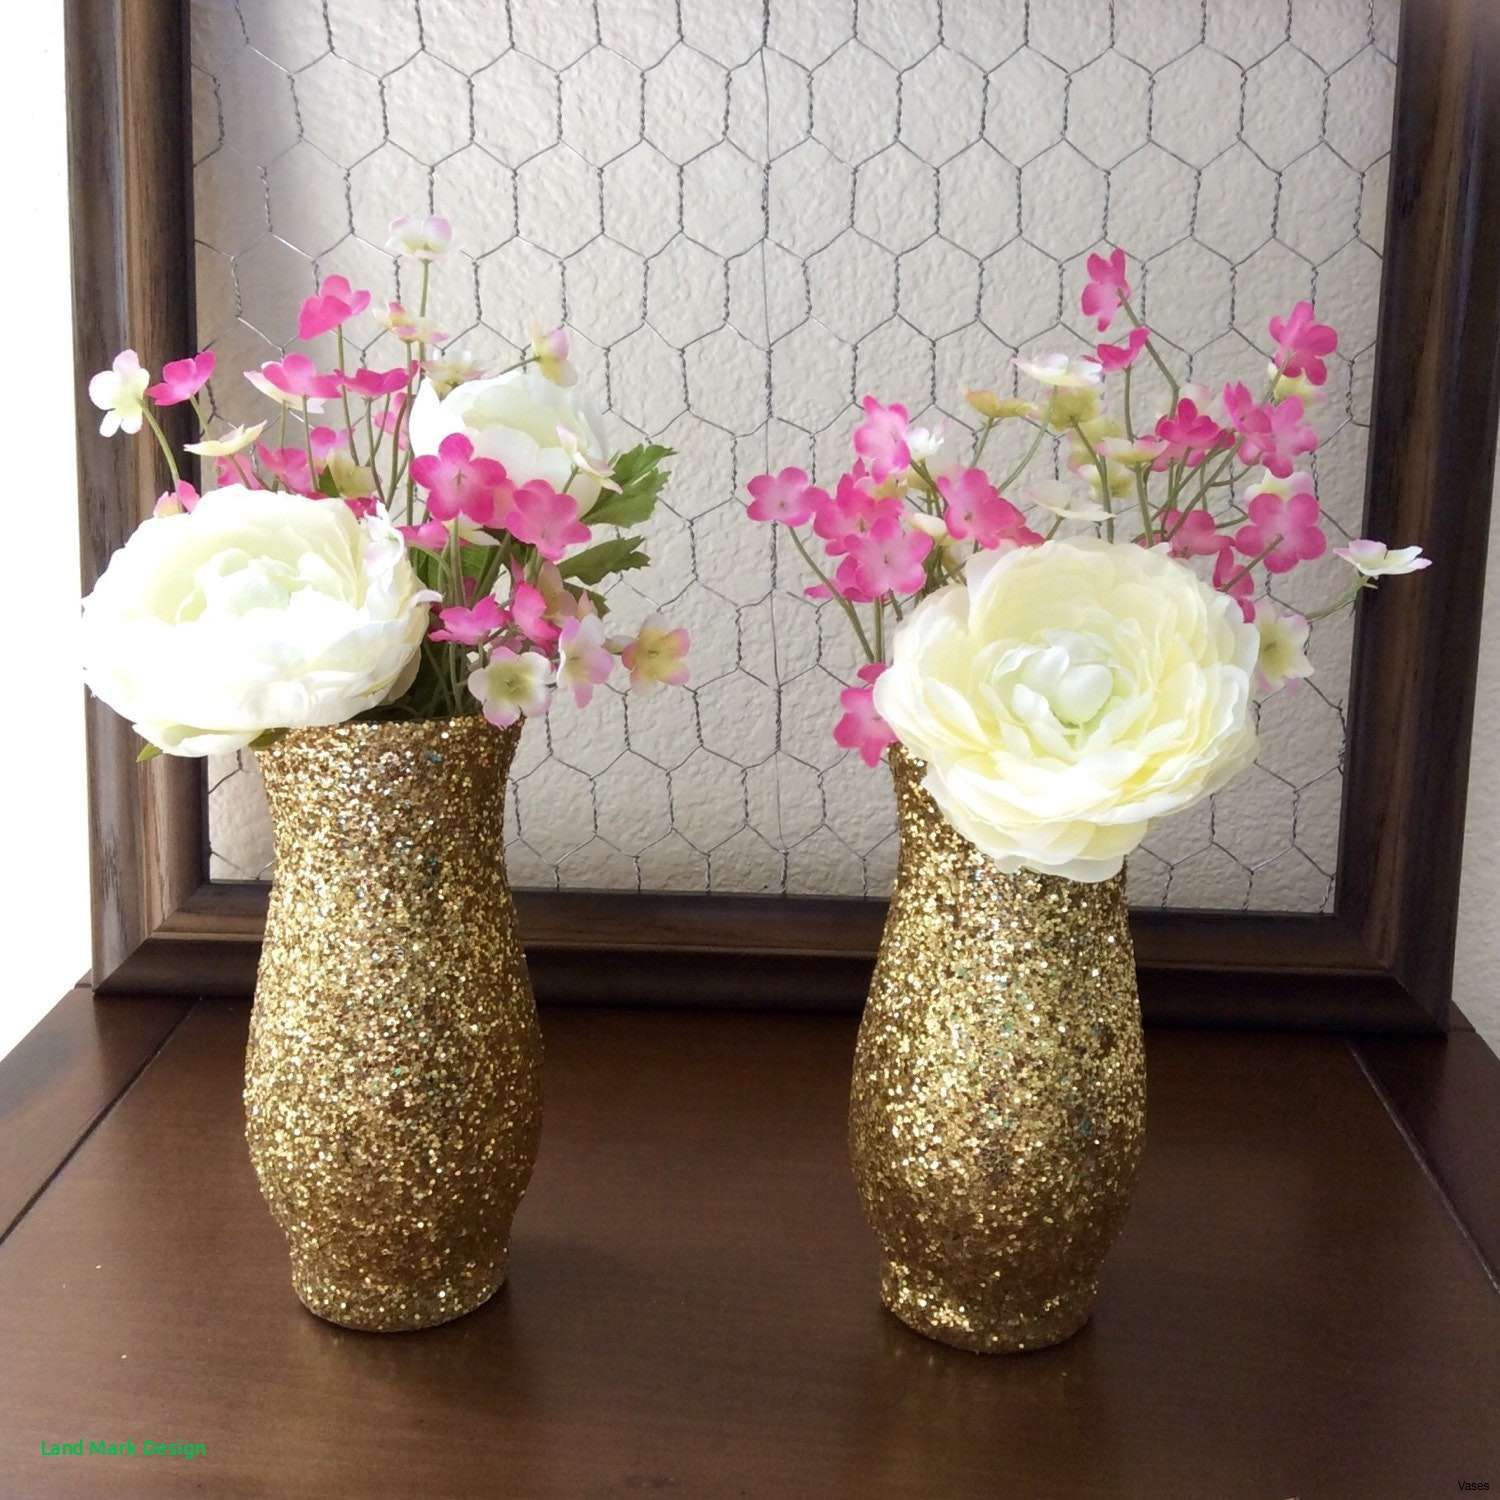 18 attractive Ceramic Flower Vases wholesale 2023 free download ceramic flower vases wholesale of 19 gold flower vases the weekly world within diy vase